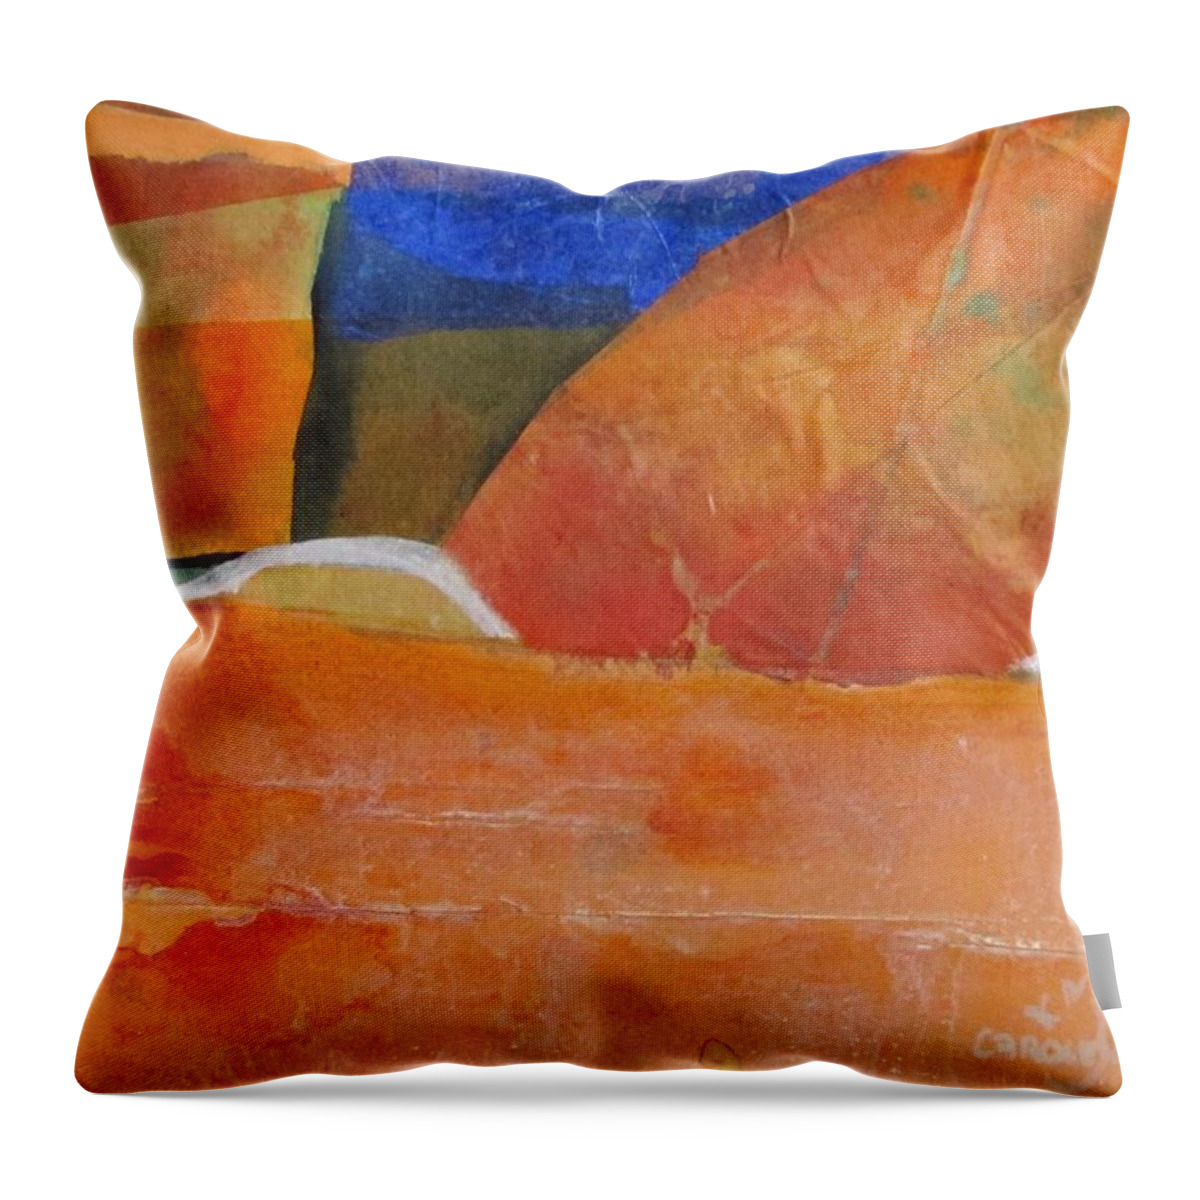 Collage Throw Pillow featuring the painting One Sun by Carole Johnson